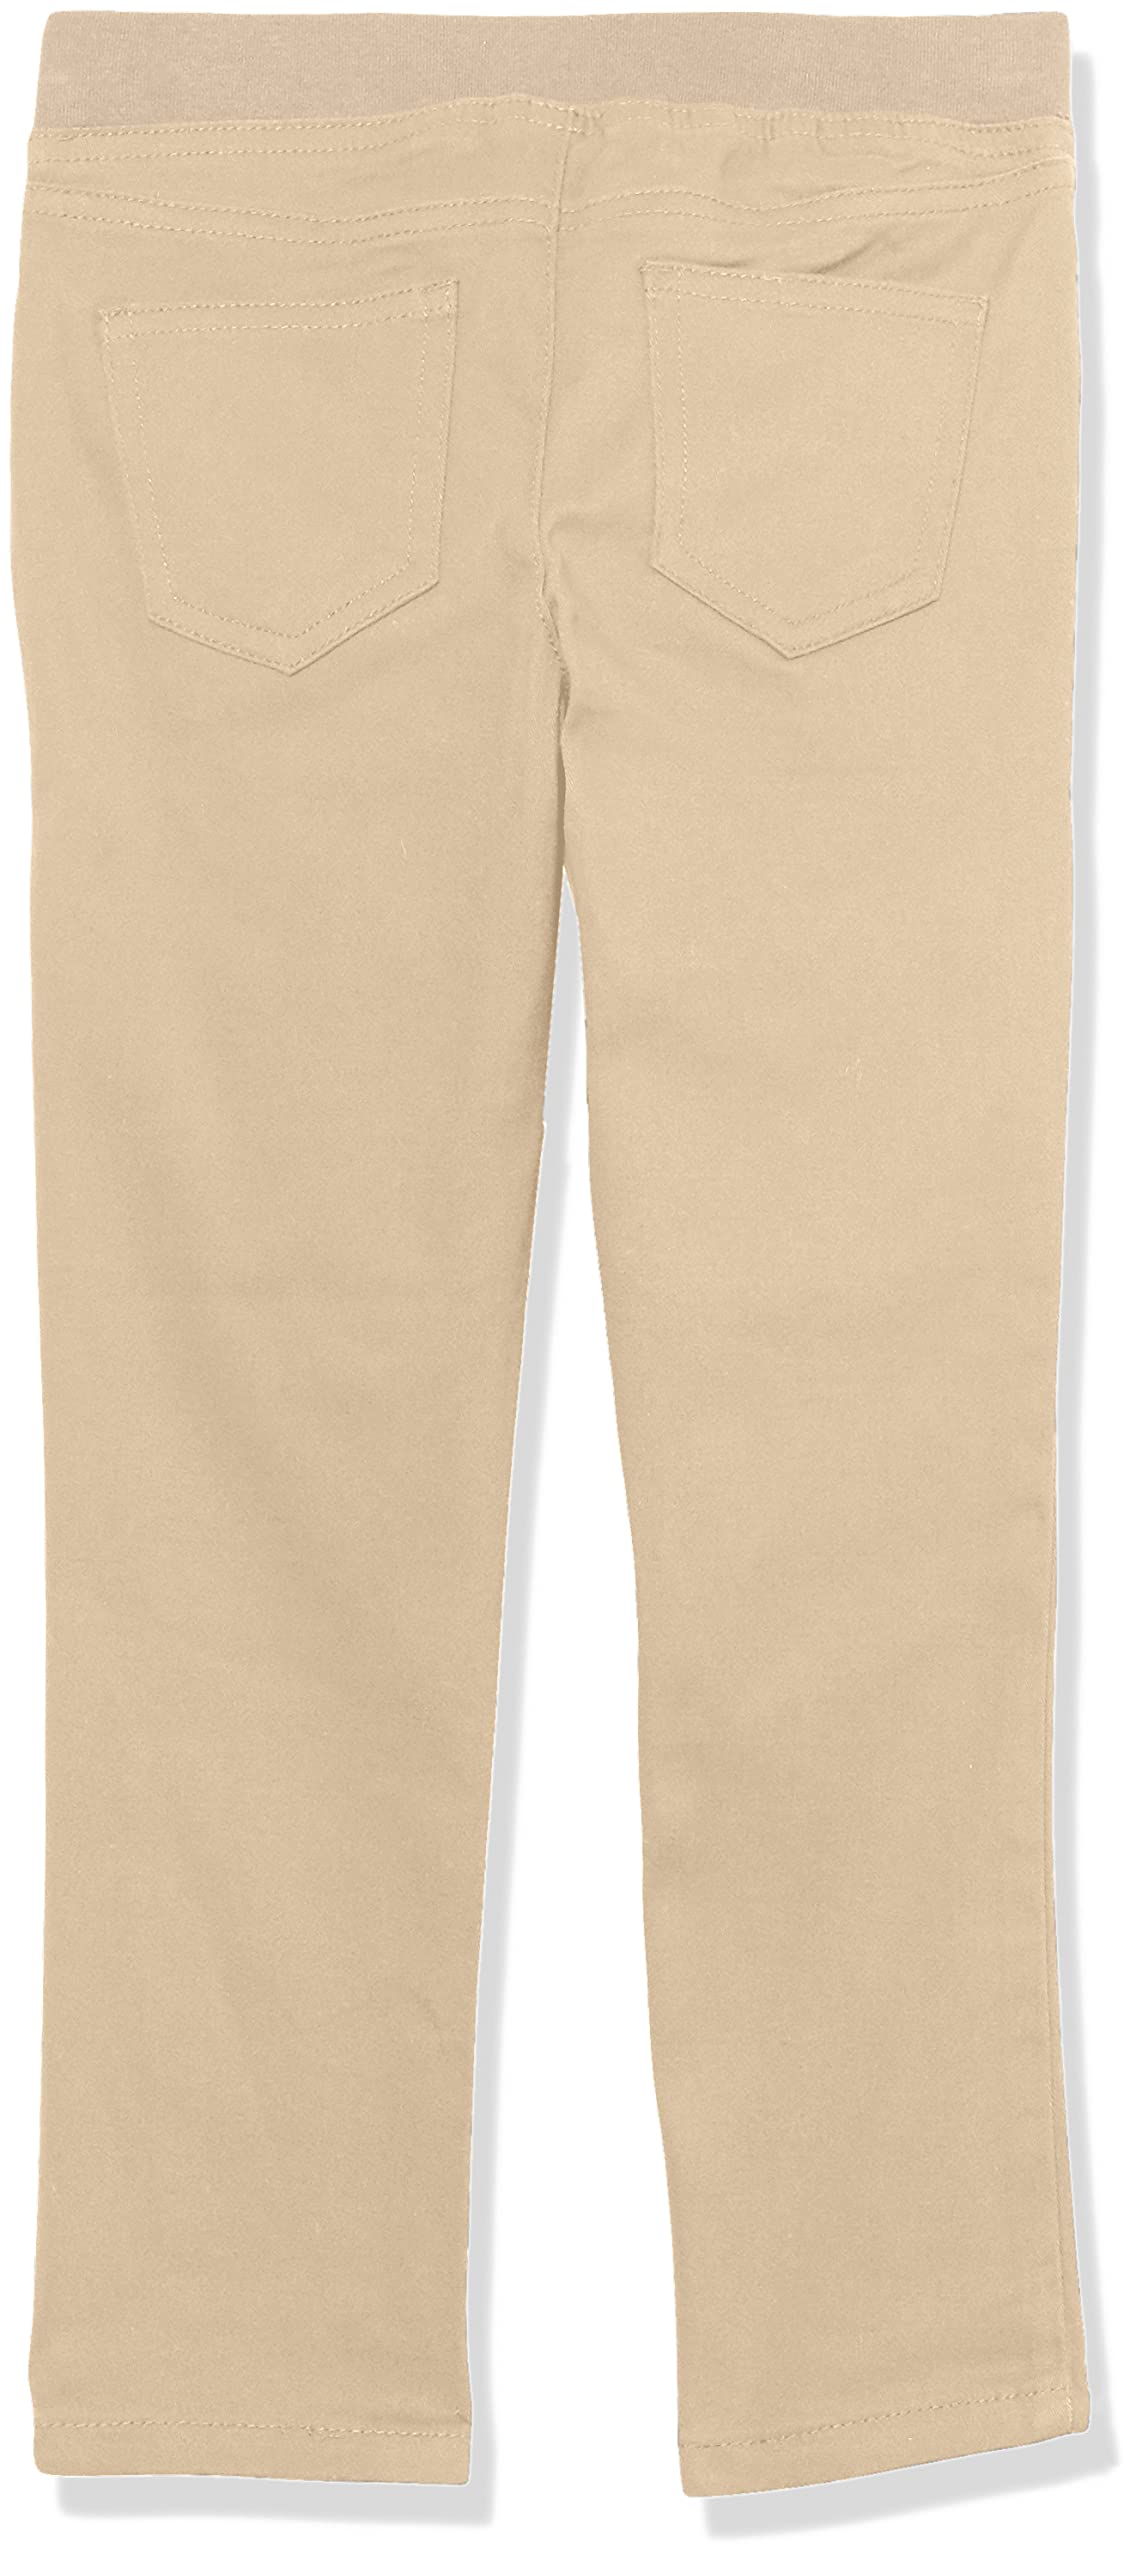 French Toast Girls' Pull-on Pant